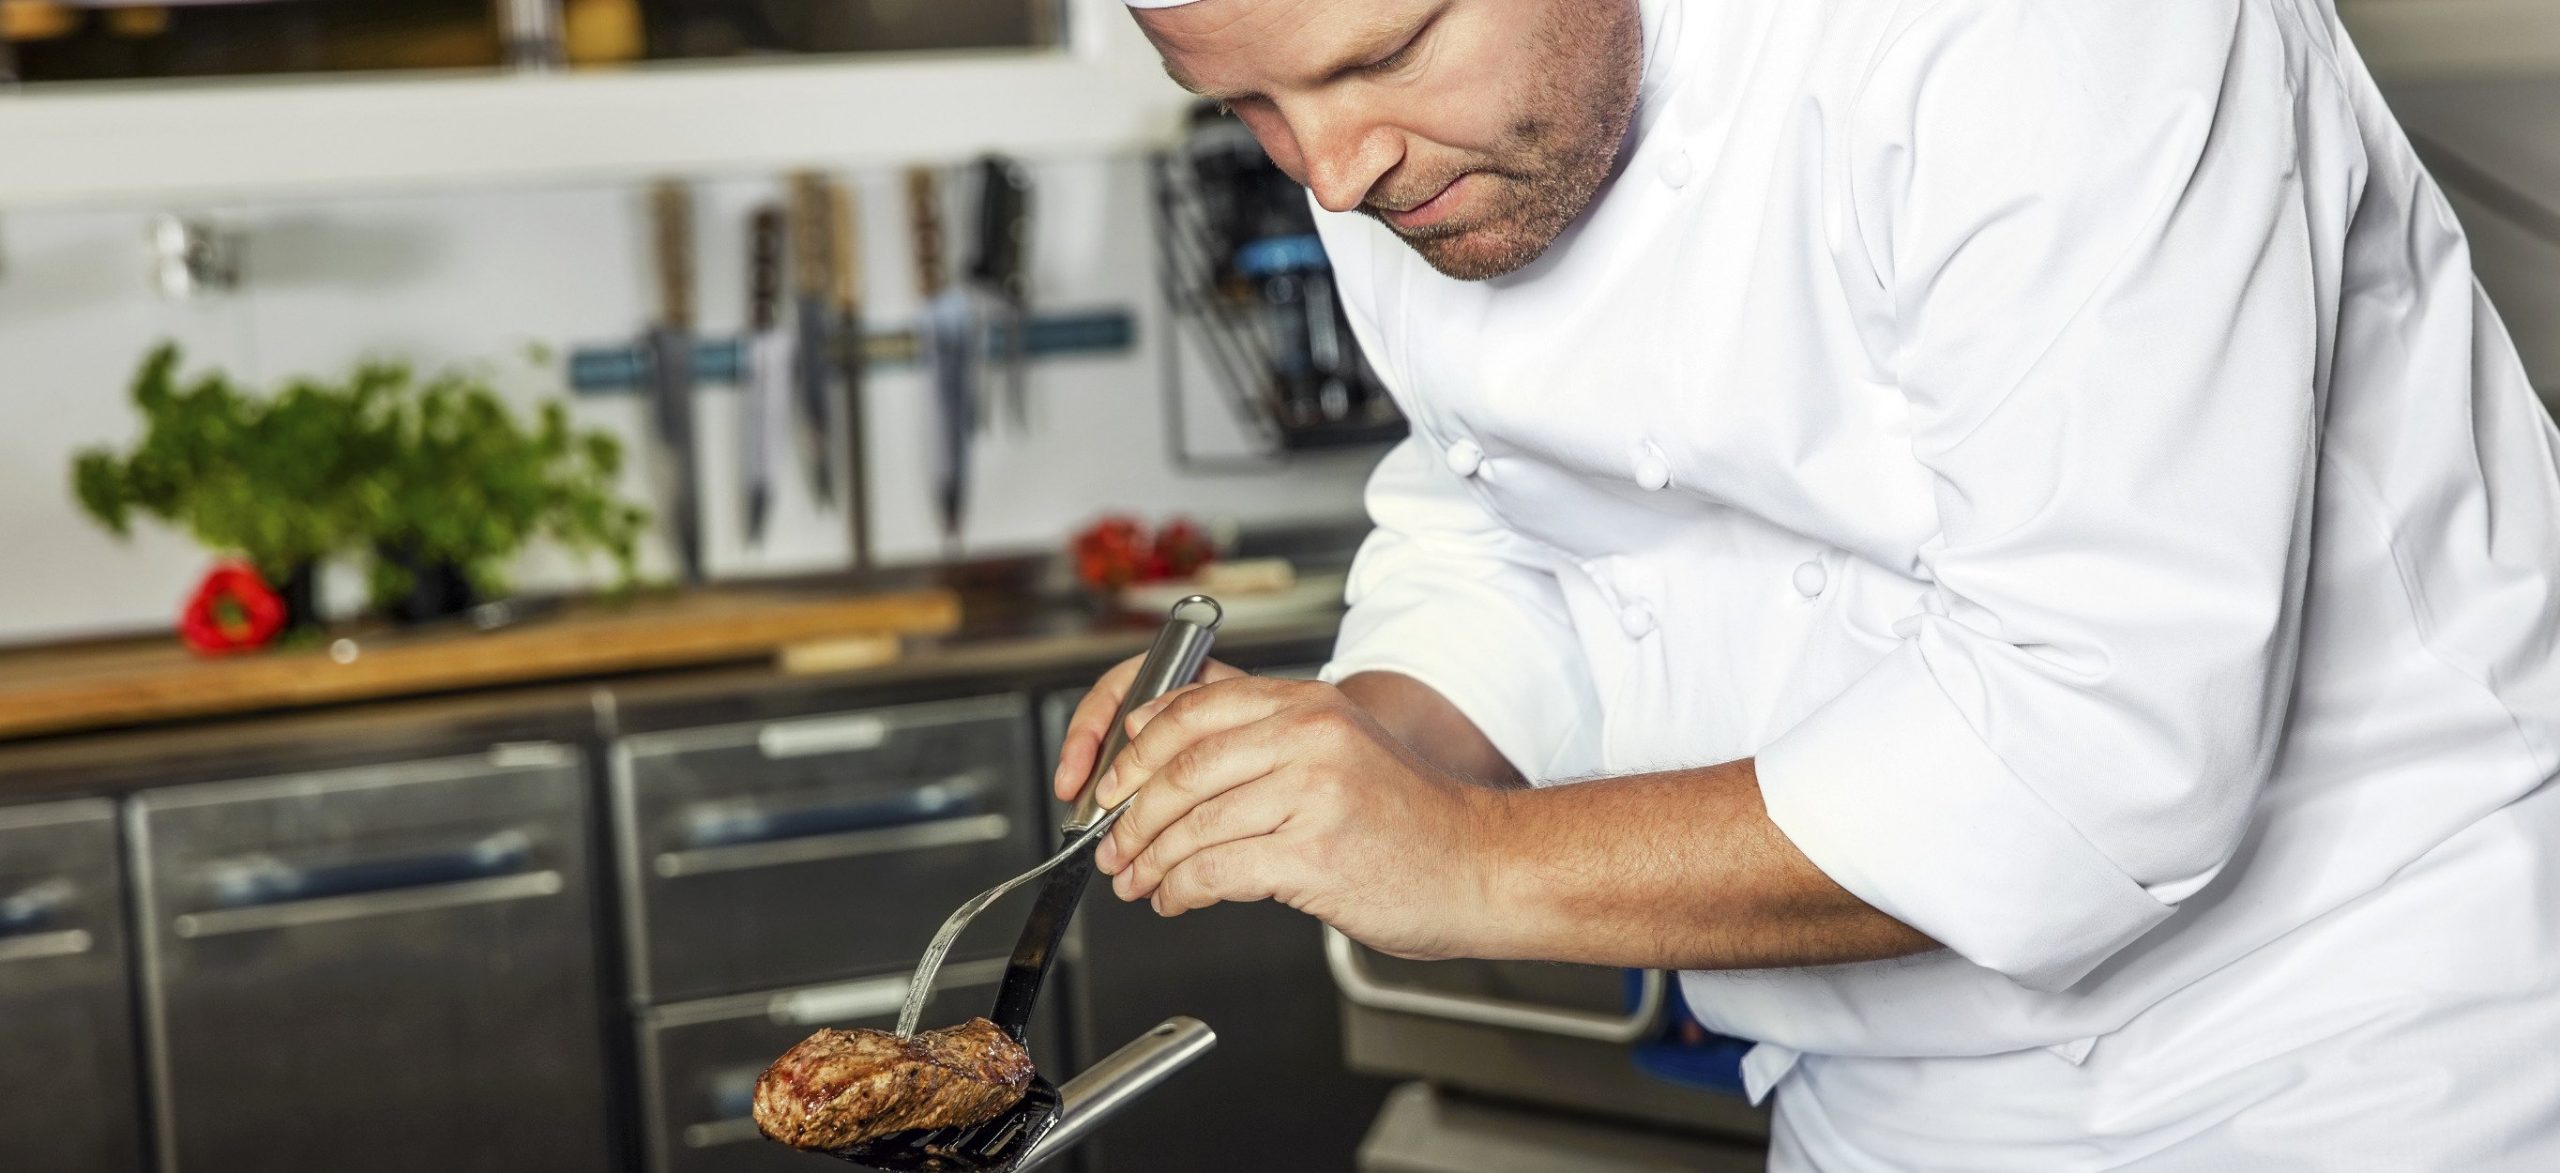 A cook prepares a steak in a commercial kitchen